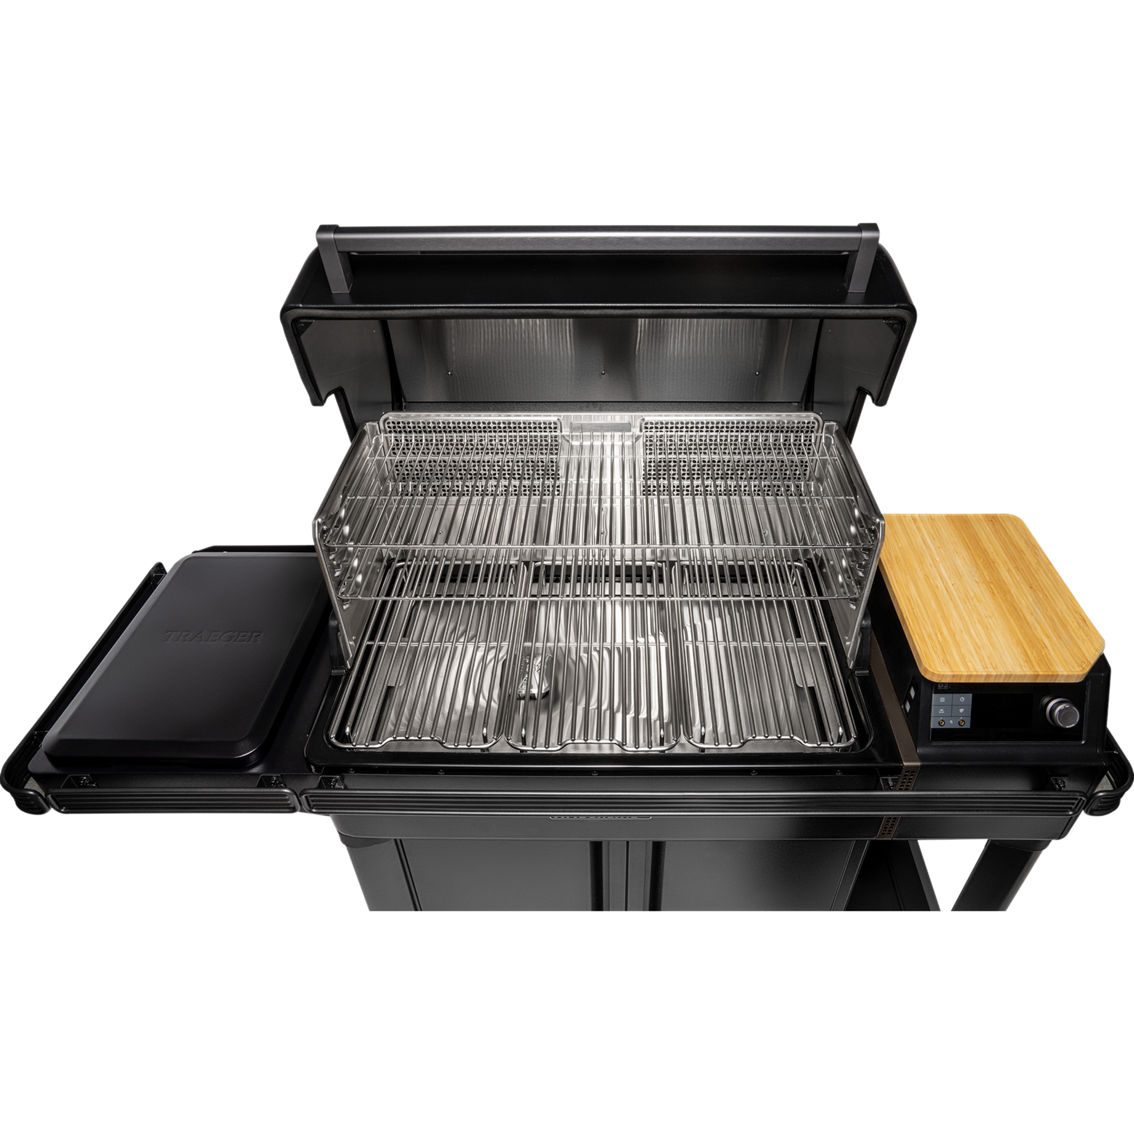 Traeger New Timberline Wood Pellet Grill XL - Image 4 of 6